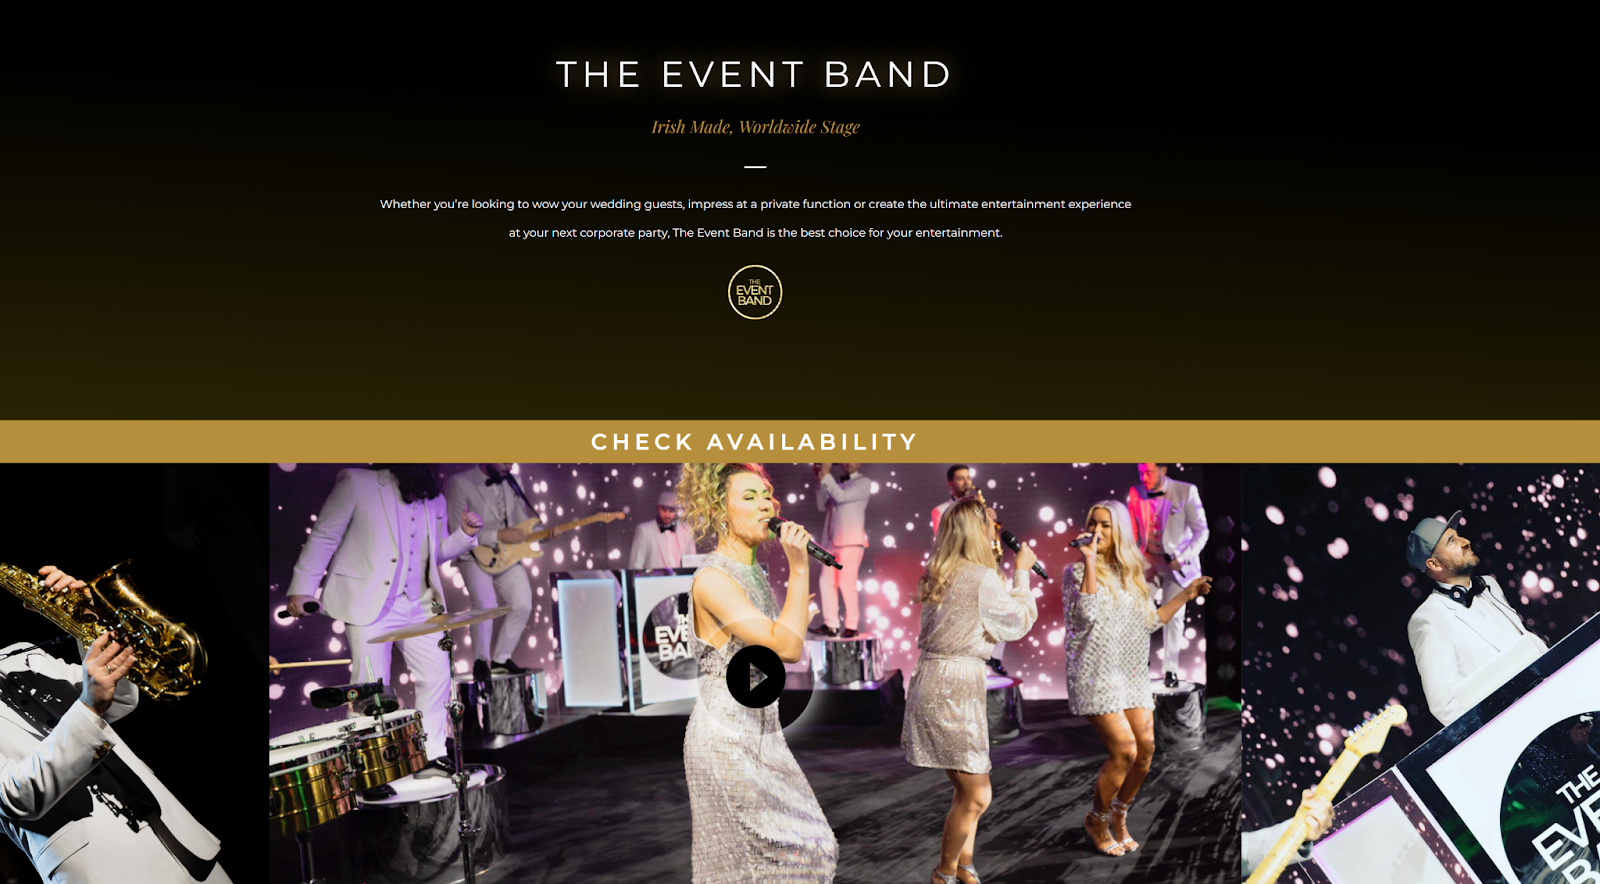 The Event Band